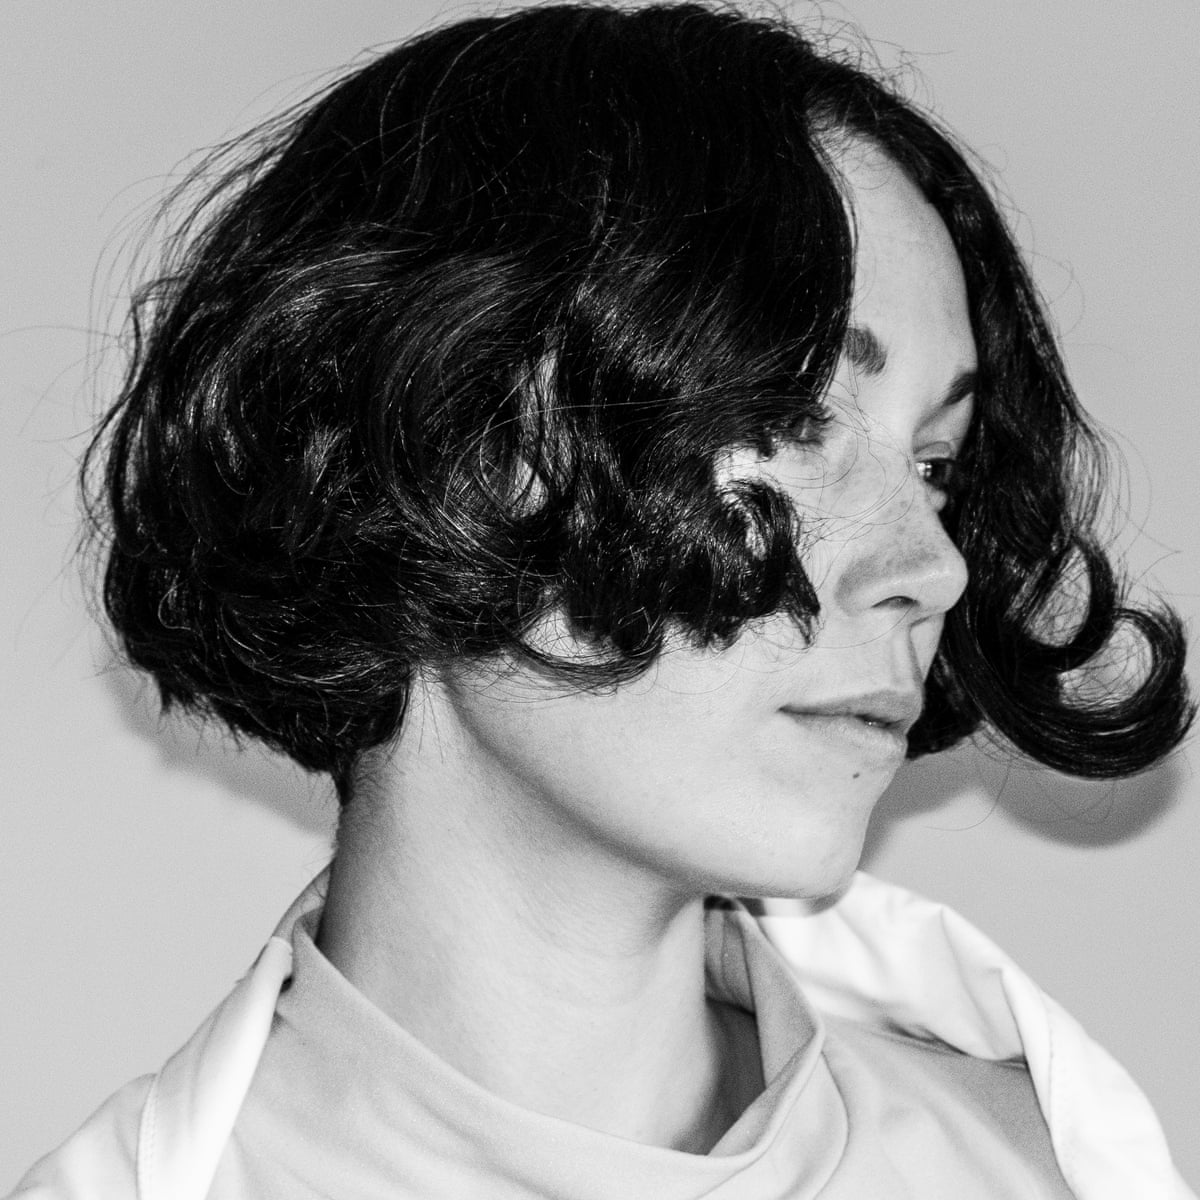 Techno DJ Kelly Lee Owens: 'I still have to fight to not be seen as just  the singer' | Electronic music | The Guardian